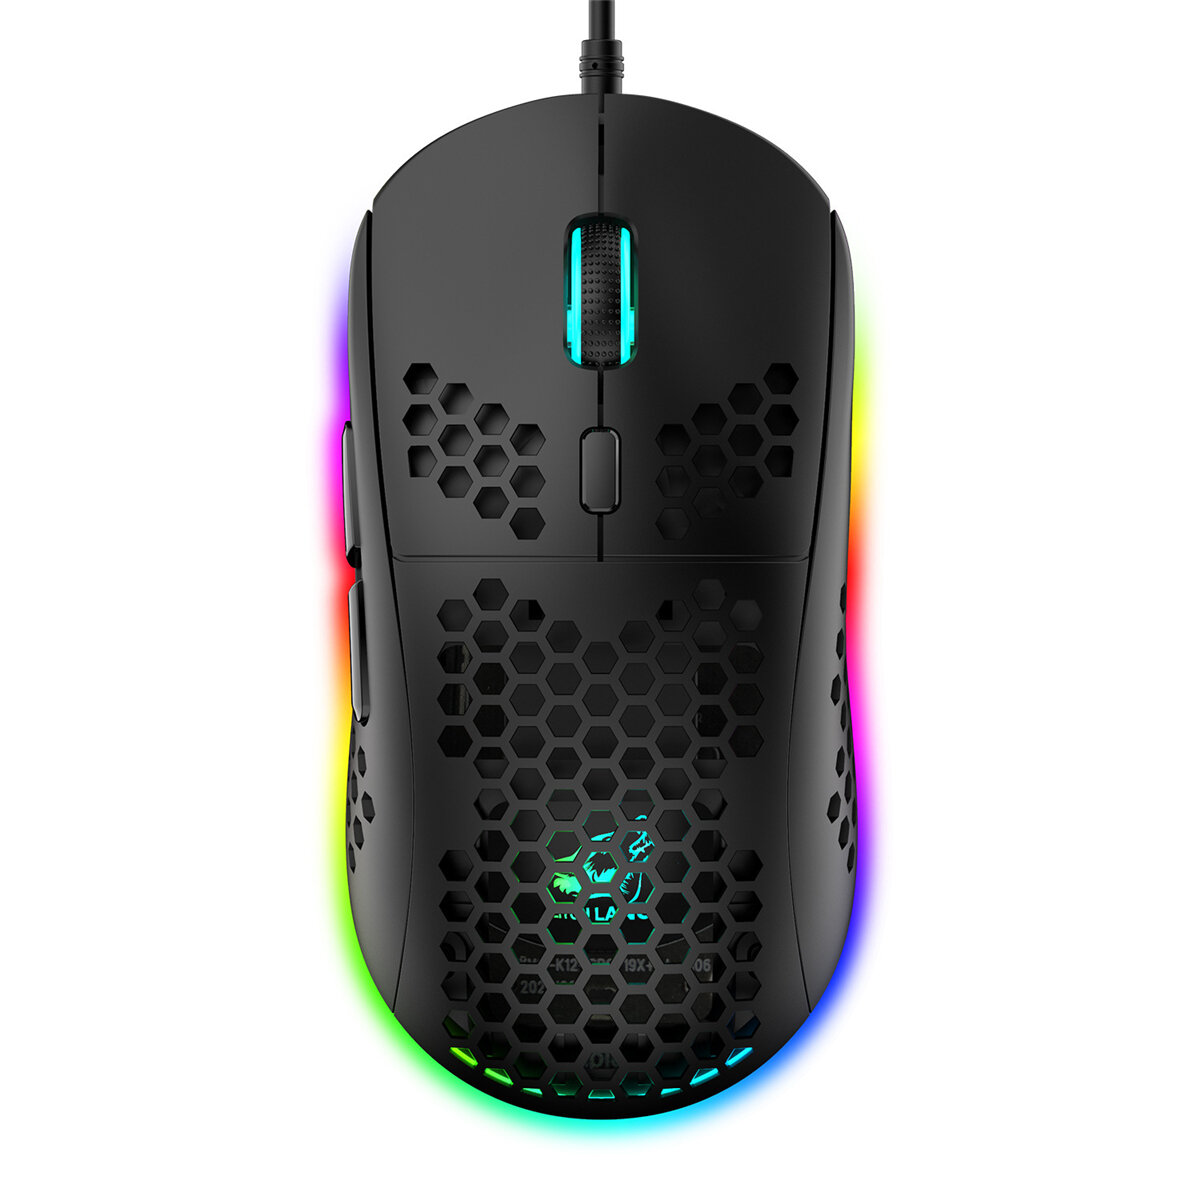 ZIYOULANG M8 Wired Game Mouse Ademhaling RGB Colorful Honeycomb Hollow 12000 DPI Gaming Mouse USB Wi